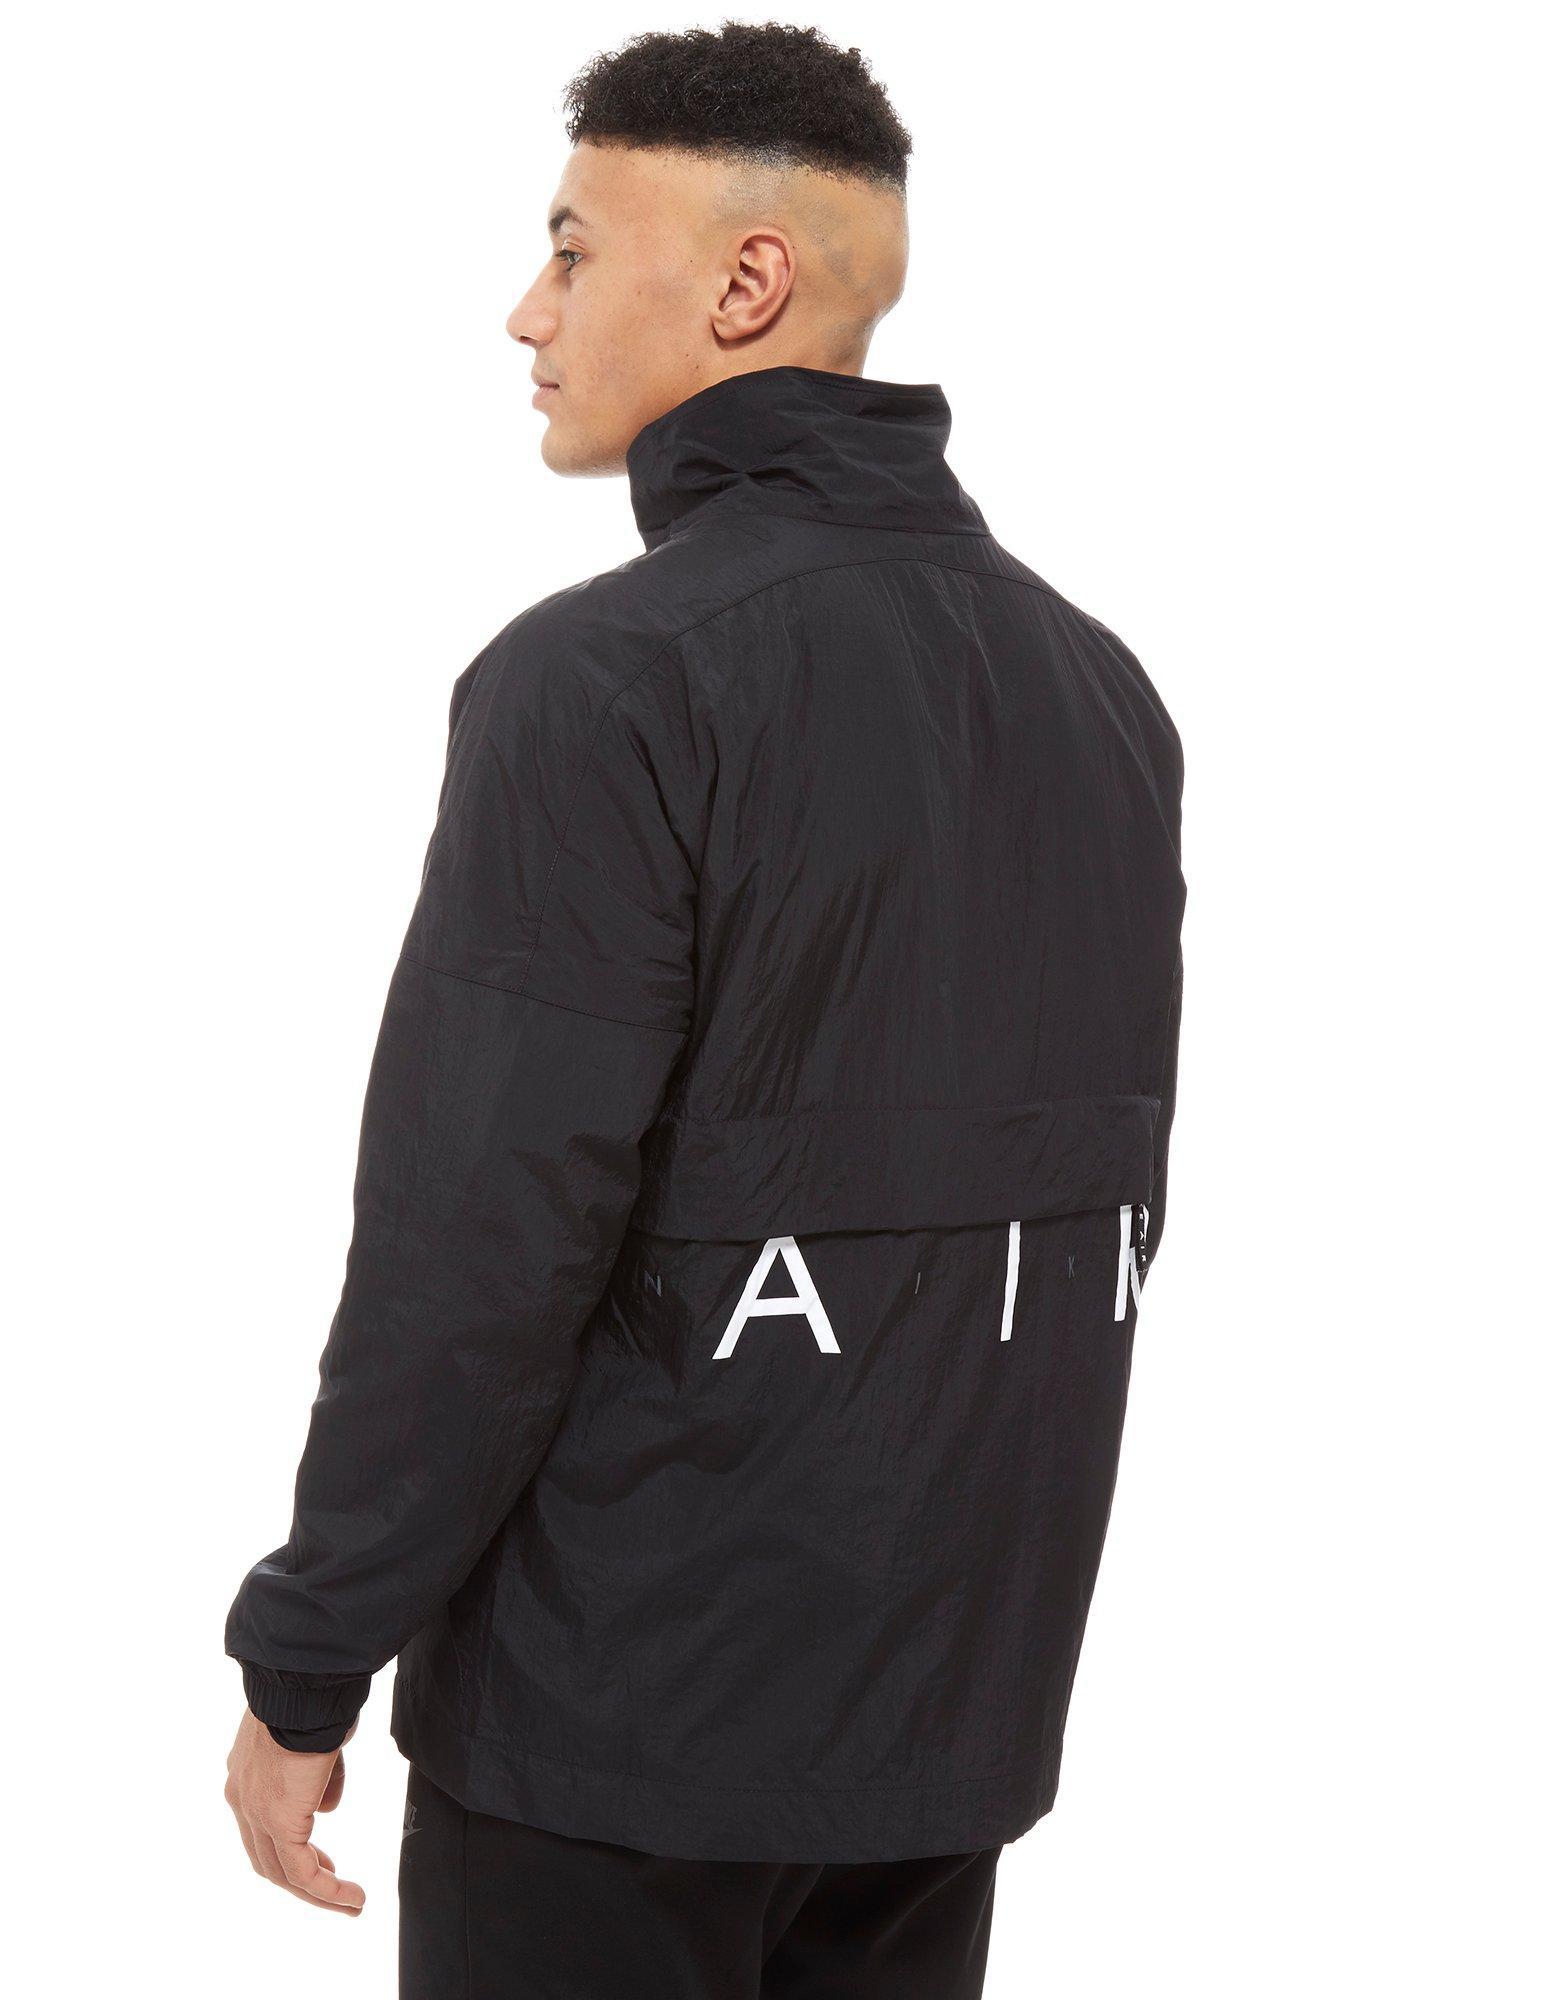 Nike Synthetic Air Woven Jacket in Black for Men - Lyst